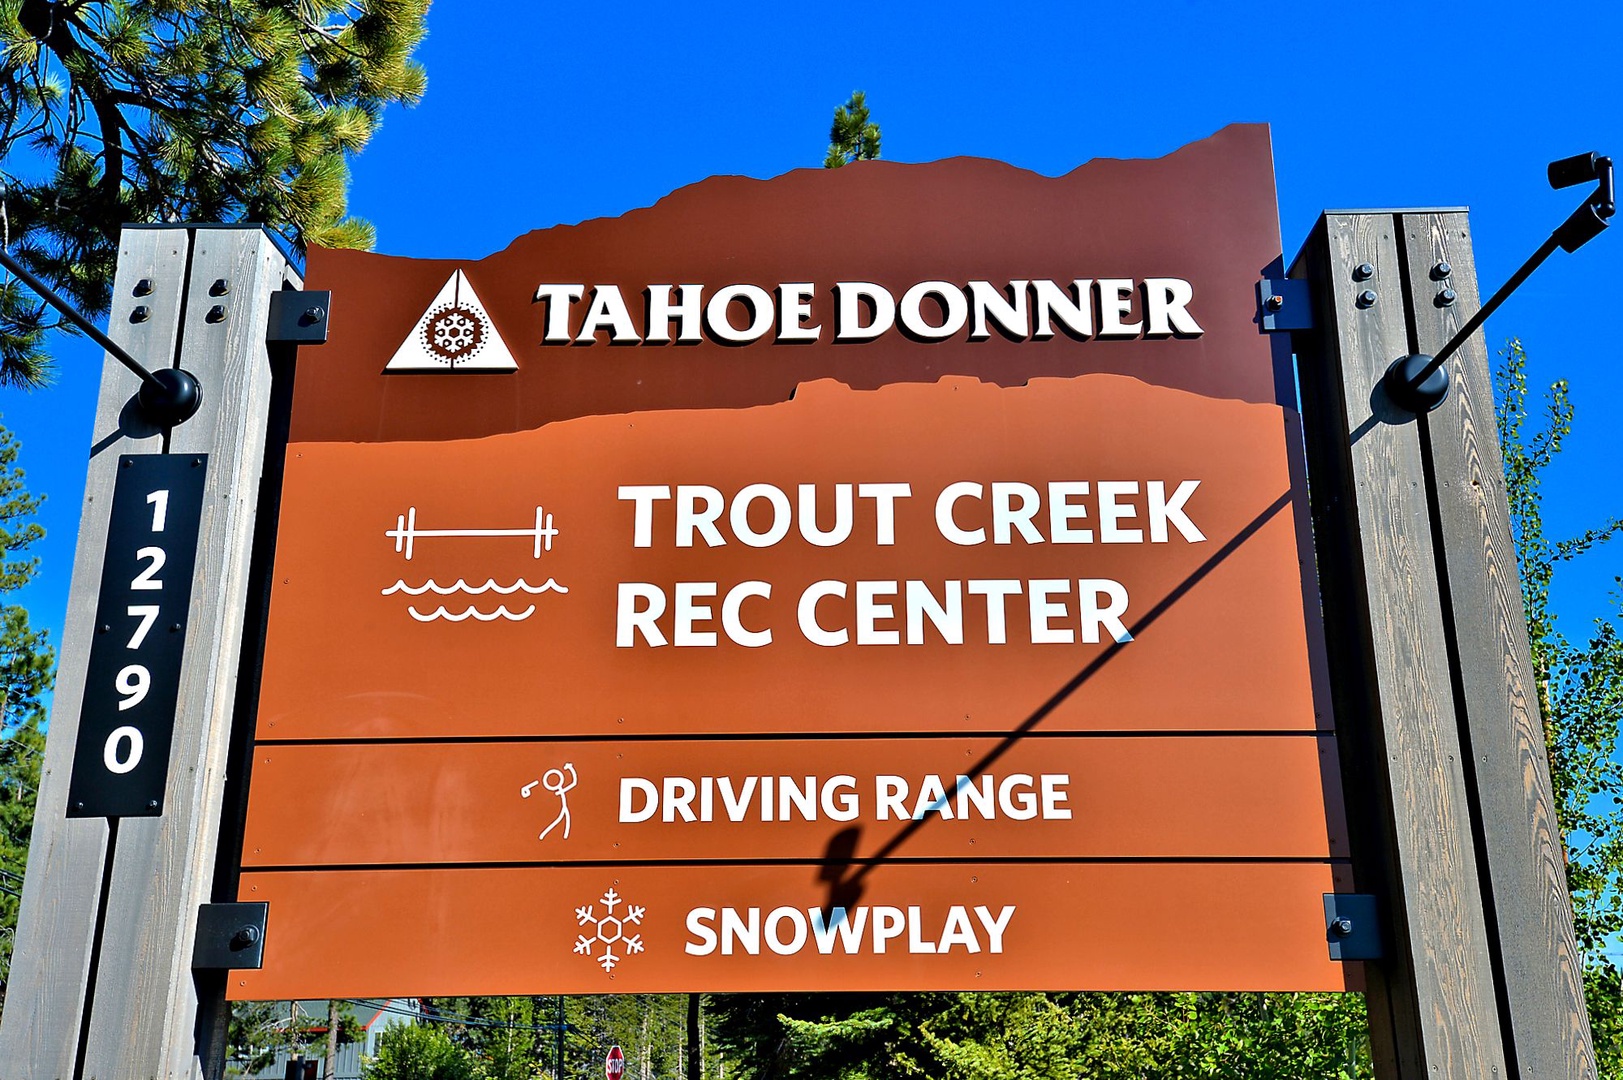 Visit the Tahoe Donner Trout Creek Rec Center: Tahoe Donner Creel Side Retreat with Hot Tub